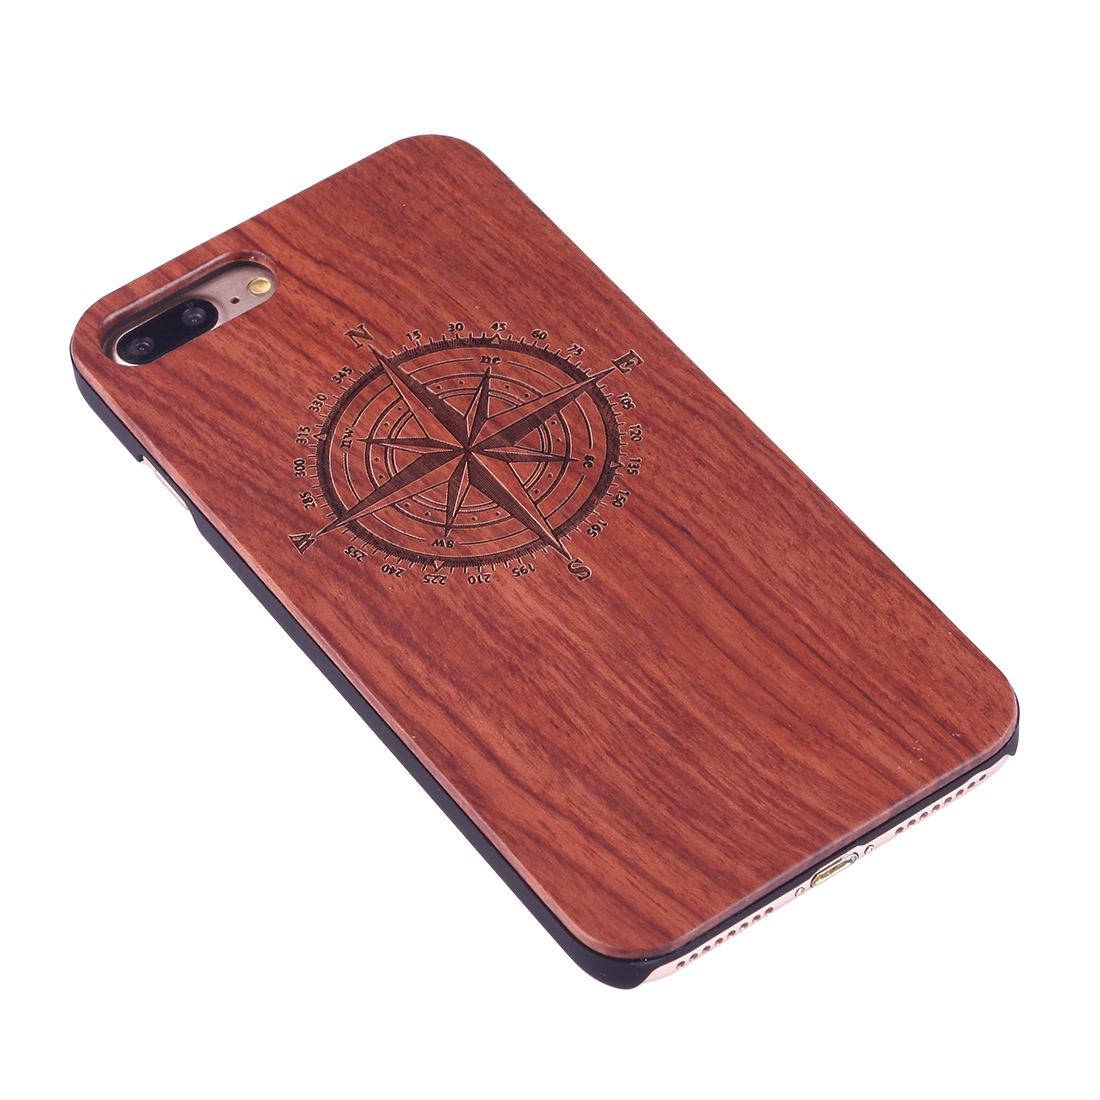 For iPhone 8 PLUS,7 PLUS Case,Rosewood Compass Wooden Durable Protective Cover